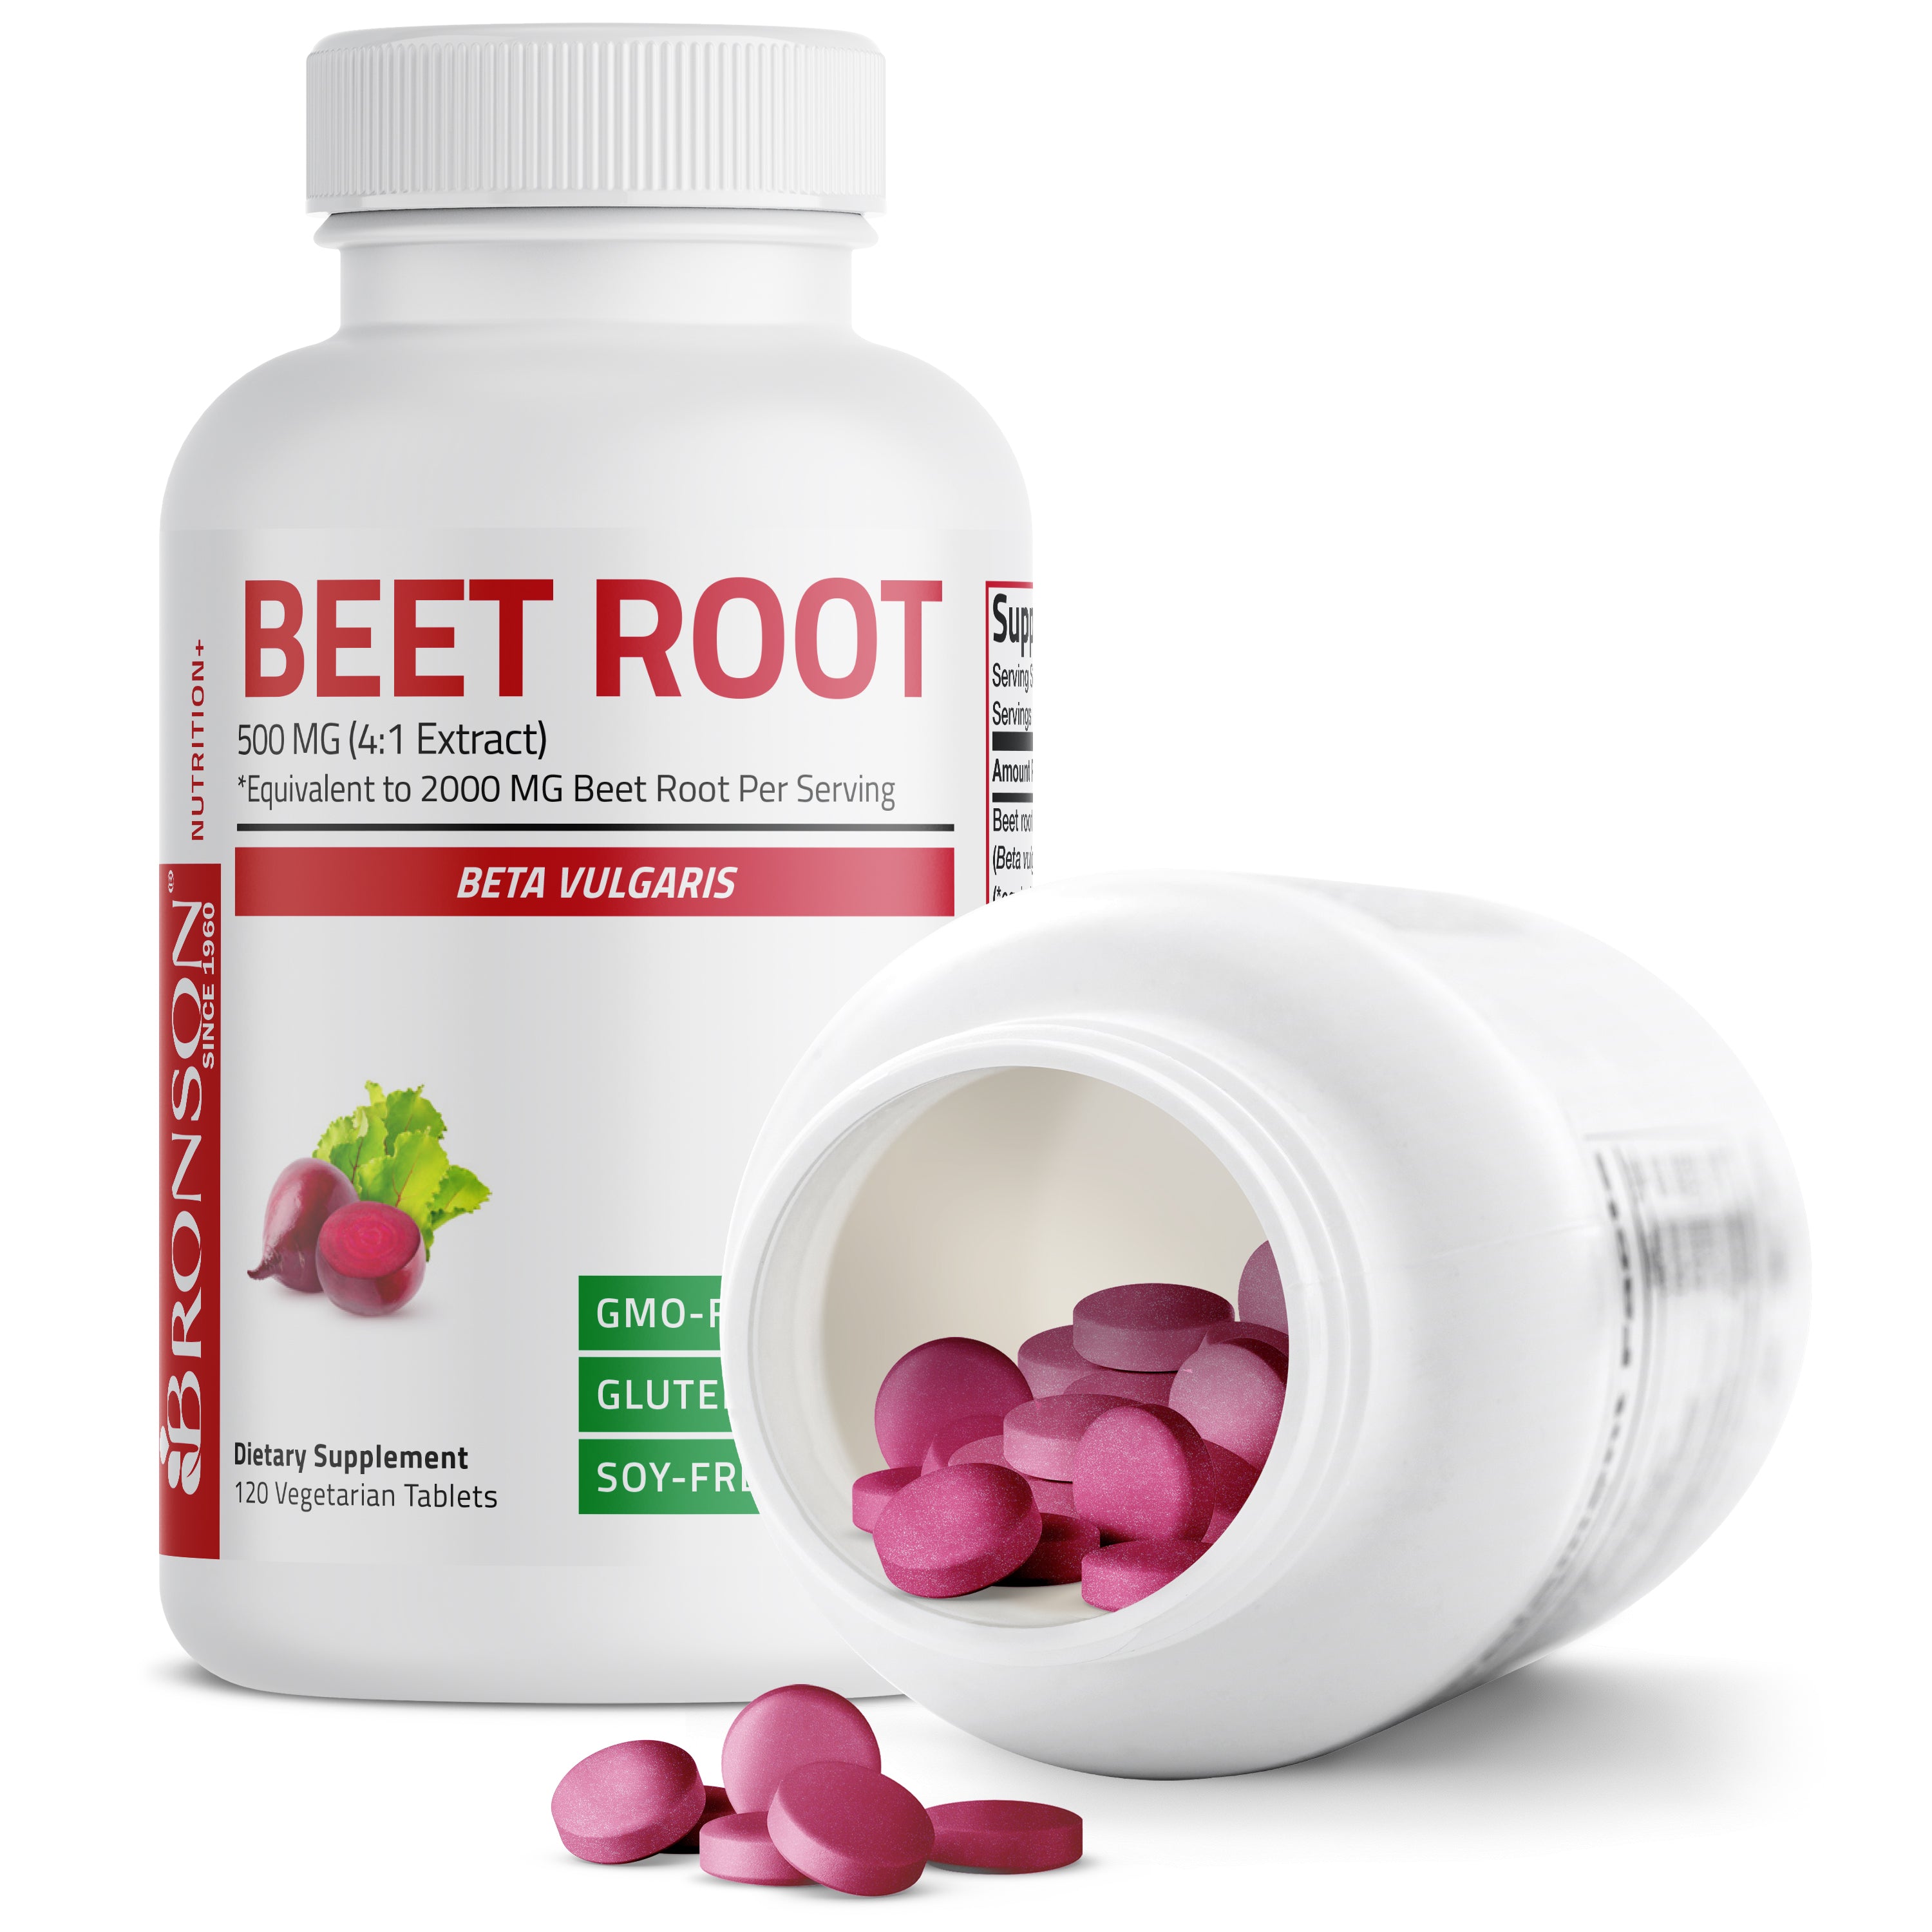 Beet Root Extra Strength - 2,000 mg view 5 of 6